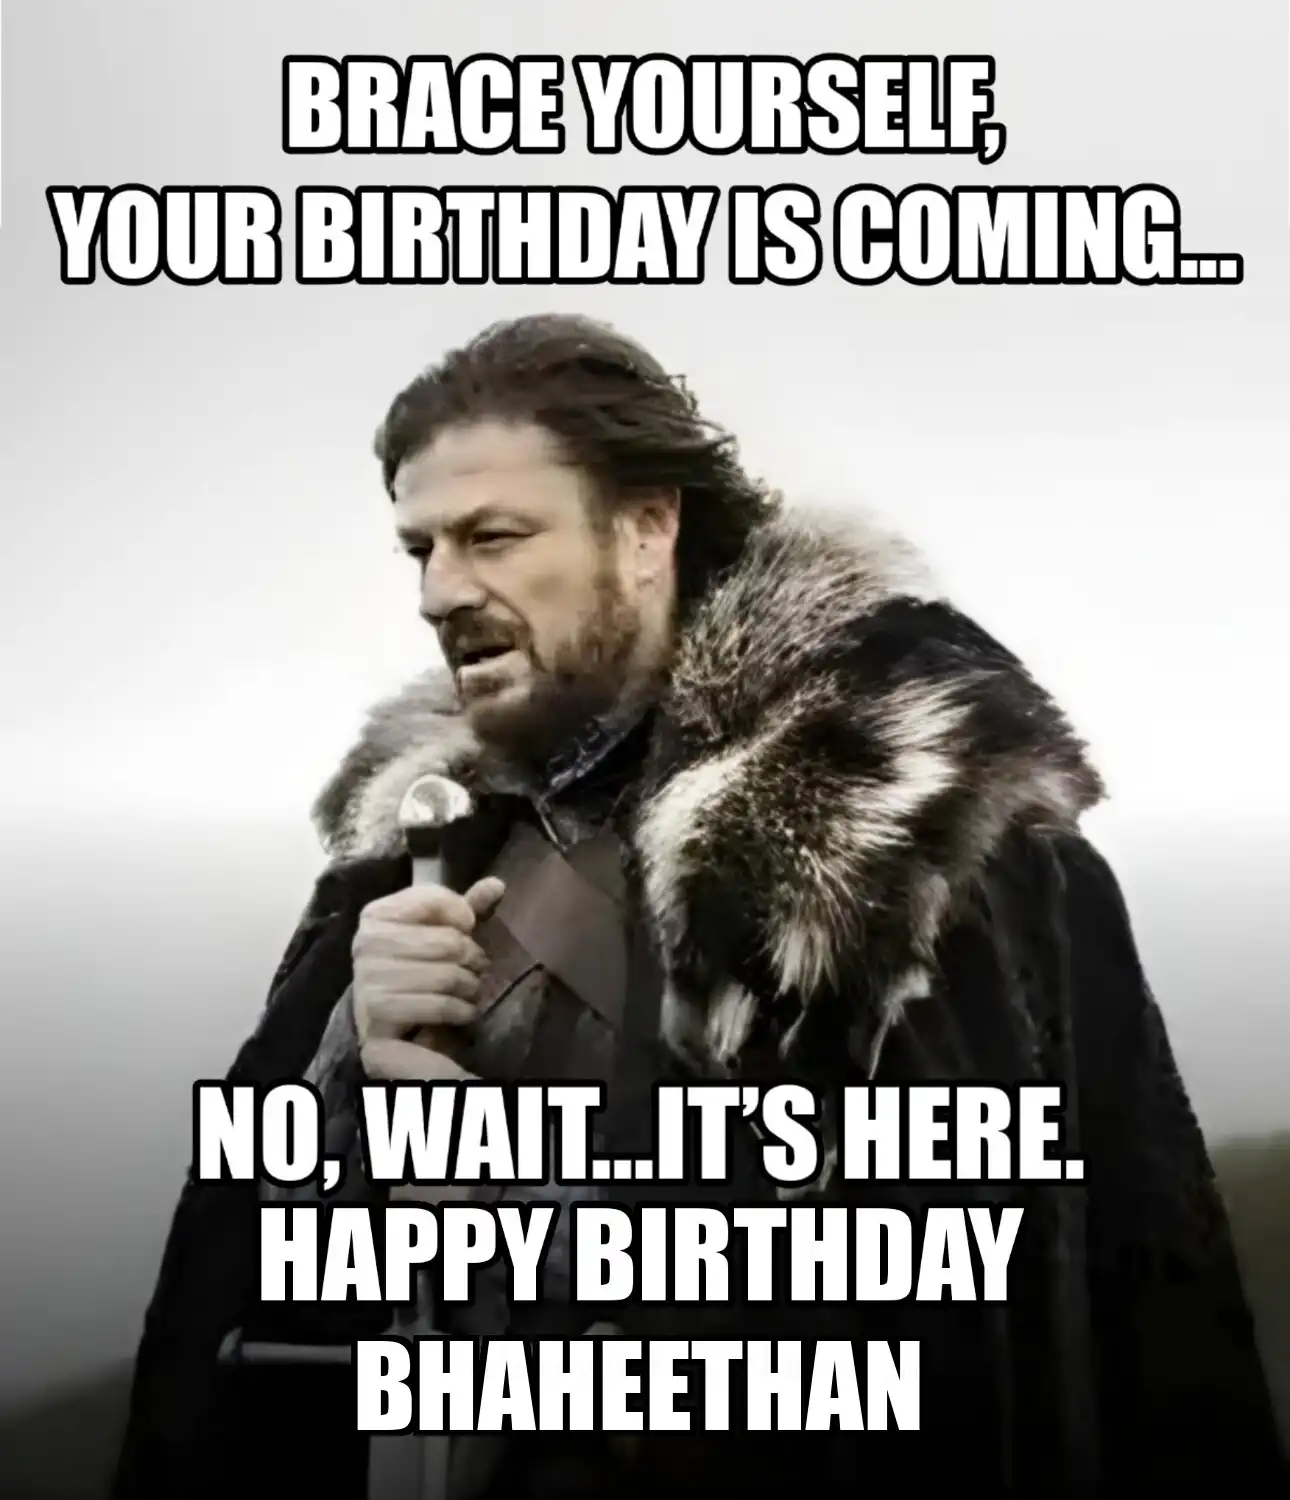 Happy Birthday Bhaheethan Brace Yourself Your Birthday Is Coming Meme